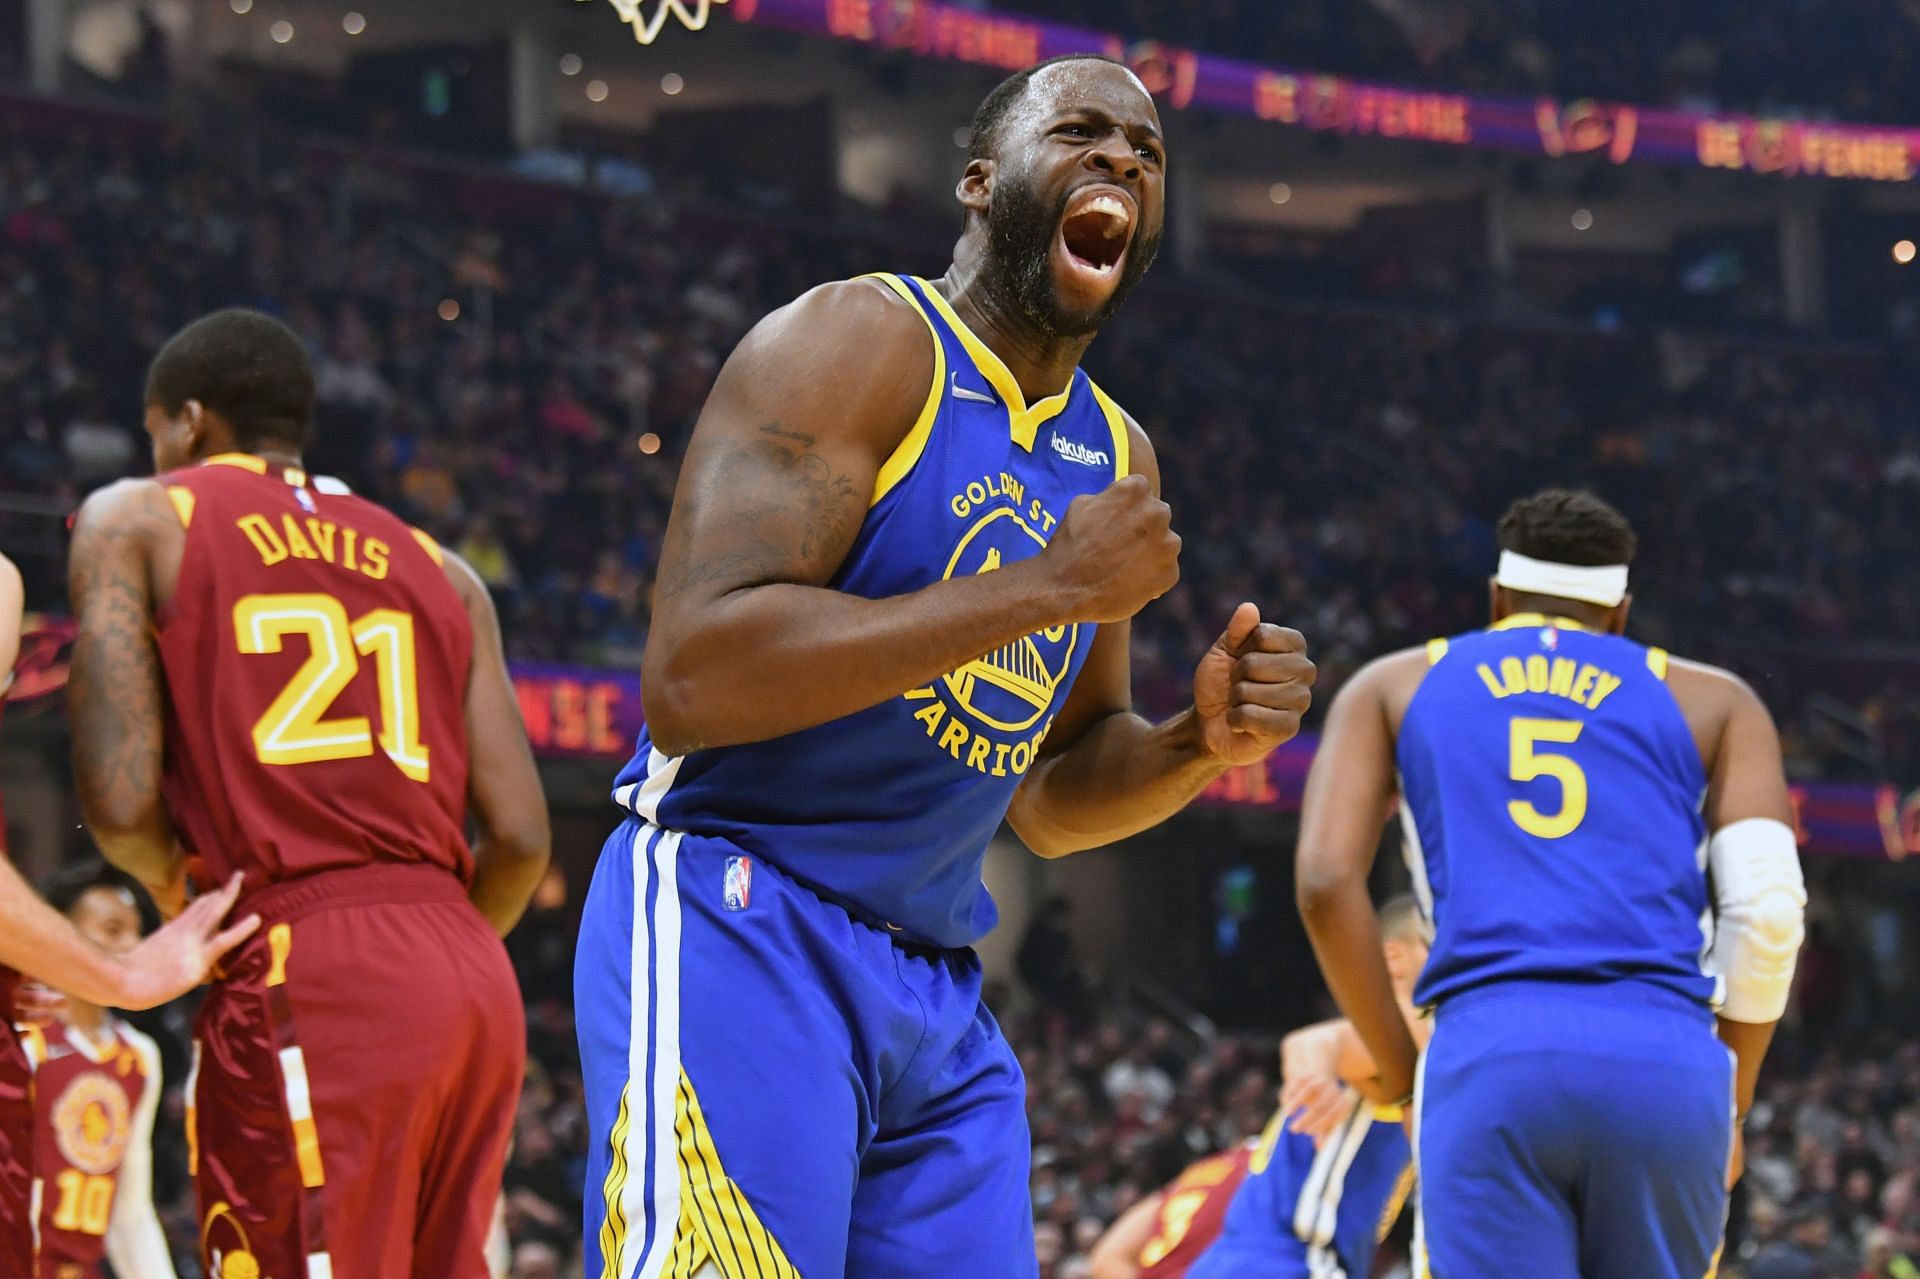 Draymond Green #23 of the Golden State Warriors reacts after scoring during the first half against the Cleveland Cavaliers 